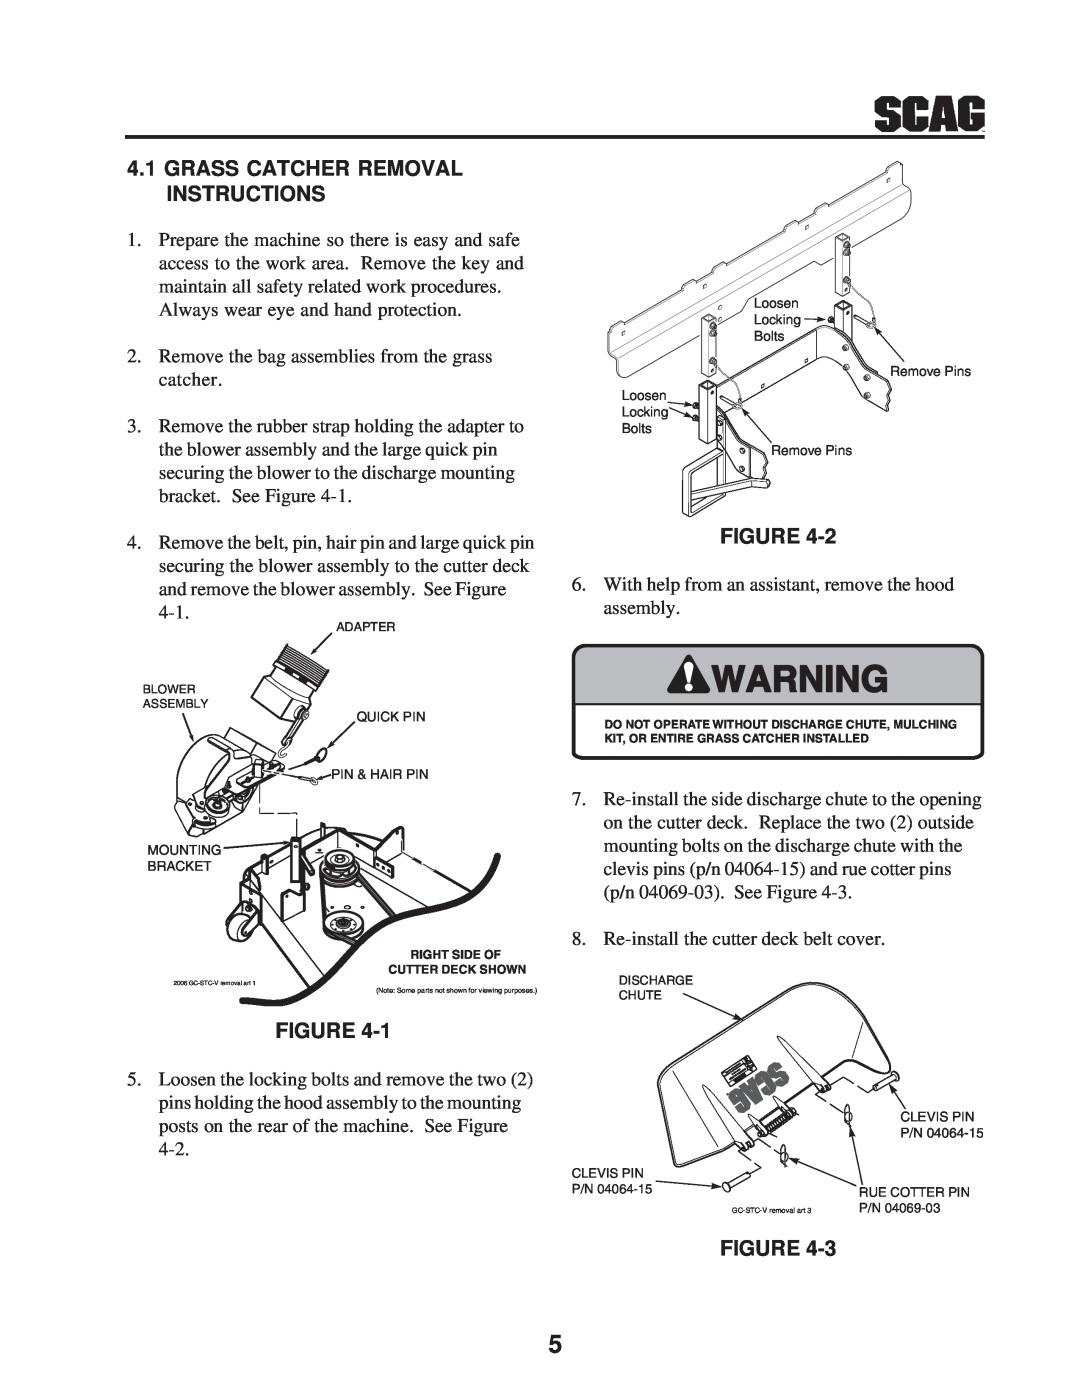 Scag Power Equipment GC-STC-V operating instructions Grass Catcher Removal Instructions 